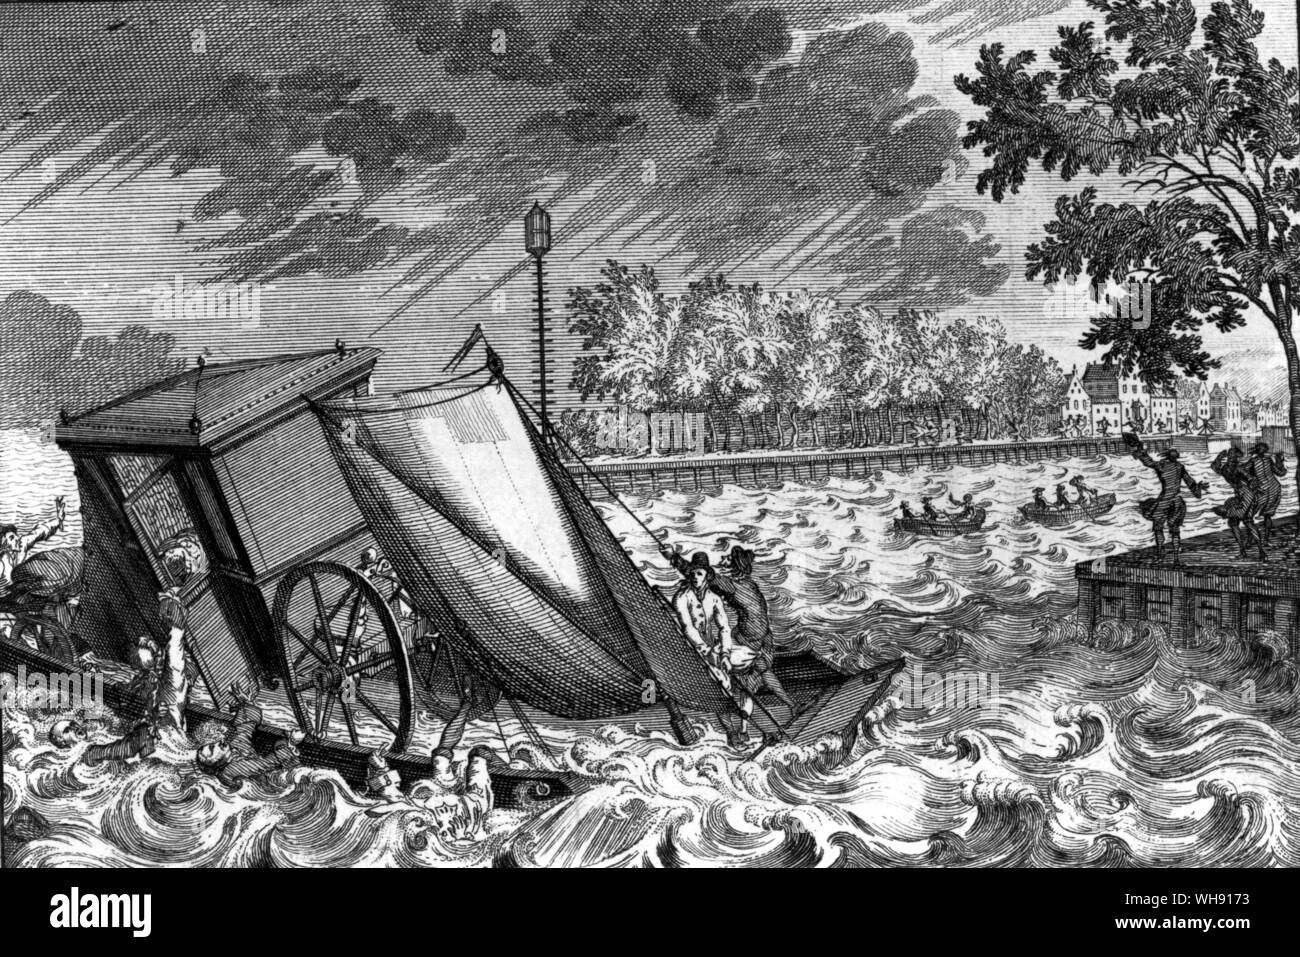 The hazards of water transport - engraving Stock Photo